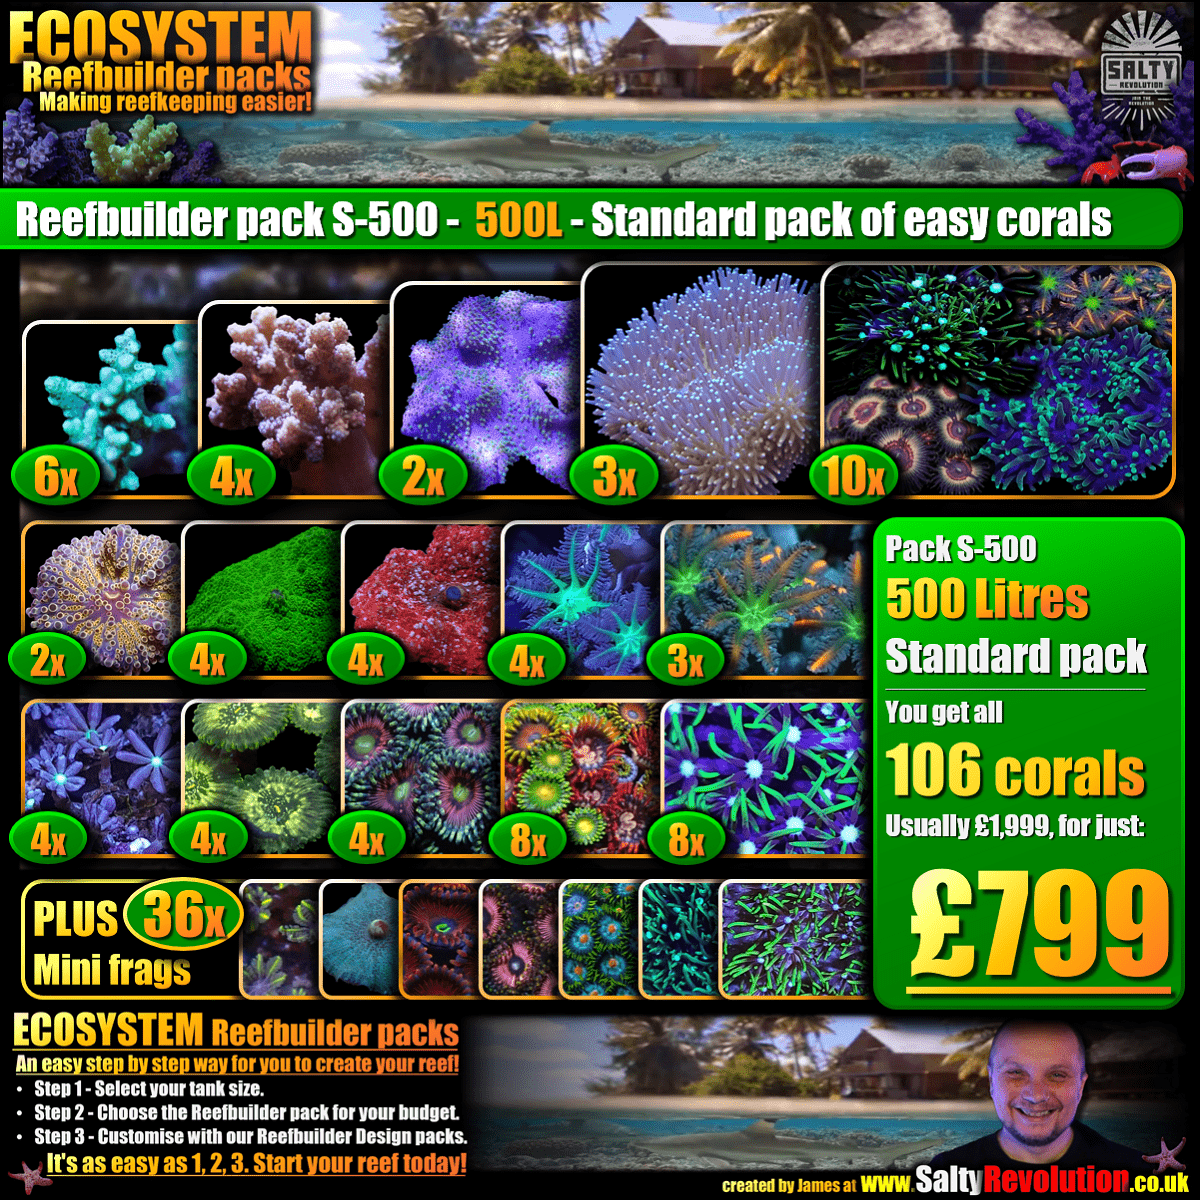 New! - ECOSYSTEM Reefbuilder pack S-500 - 500L Standard pack of easy corals